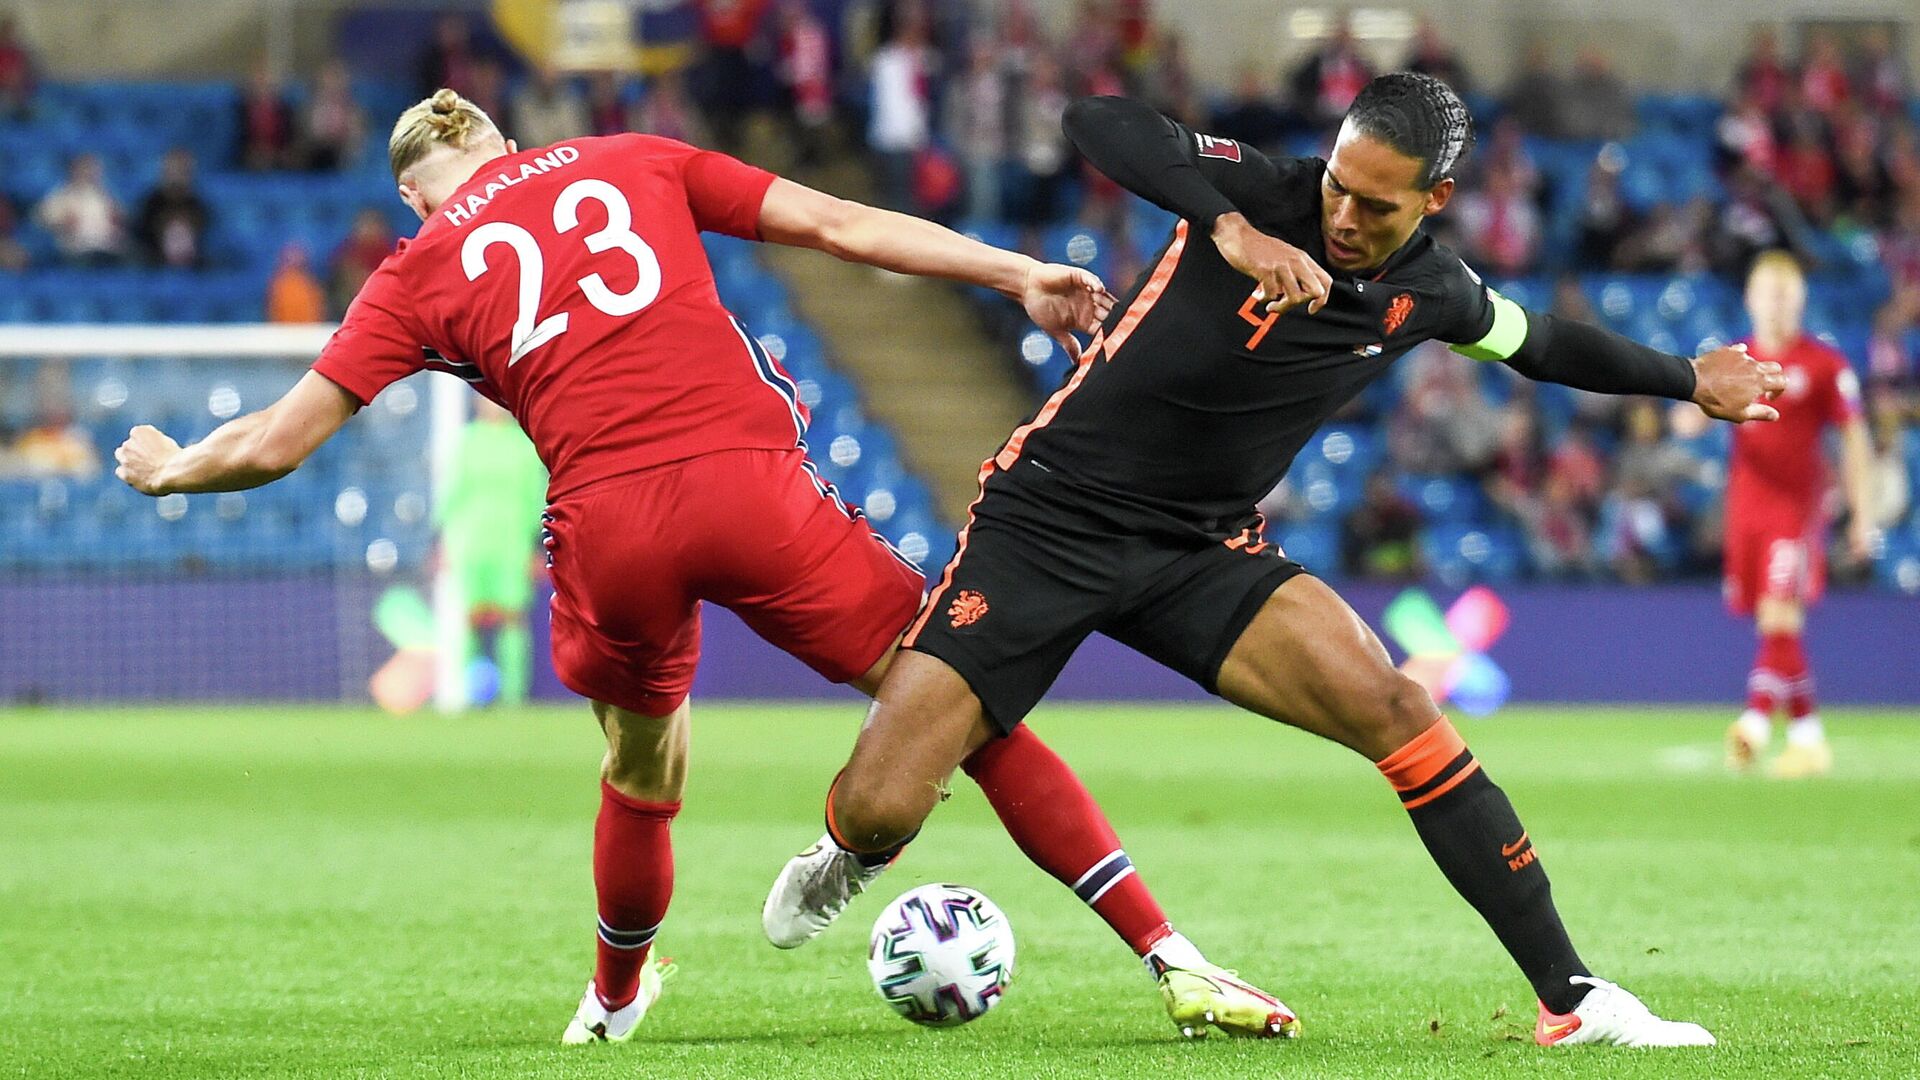 Soccer Football - World Cup - UEFA Qualifiers - Group G - Norway v Netherlands - Ullevaal Stadion, Oslo, Norway - September 1, 2021  Norway's Erling Braut Haaland in action with Netherlands' Virgil van Dijk Fredrik Varfjell/NTB via REUTERS    ATTENTION EDITORS - THIS IMAGE WAS PROVIDED BY A THIRD PARTY. NORWAY OUT. NO COMMERCIAL OR EDITORIAL SALES IN NORWAY. - РИА Новости, 1920, 02.09.2021